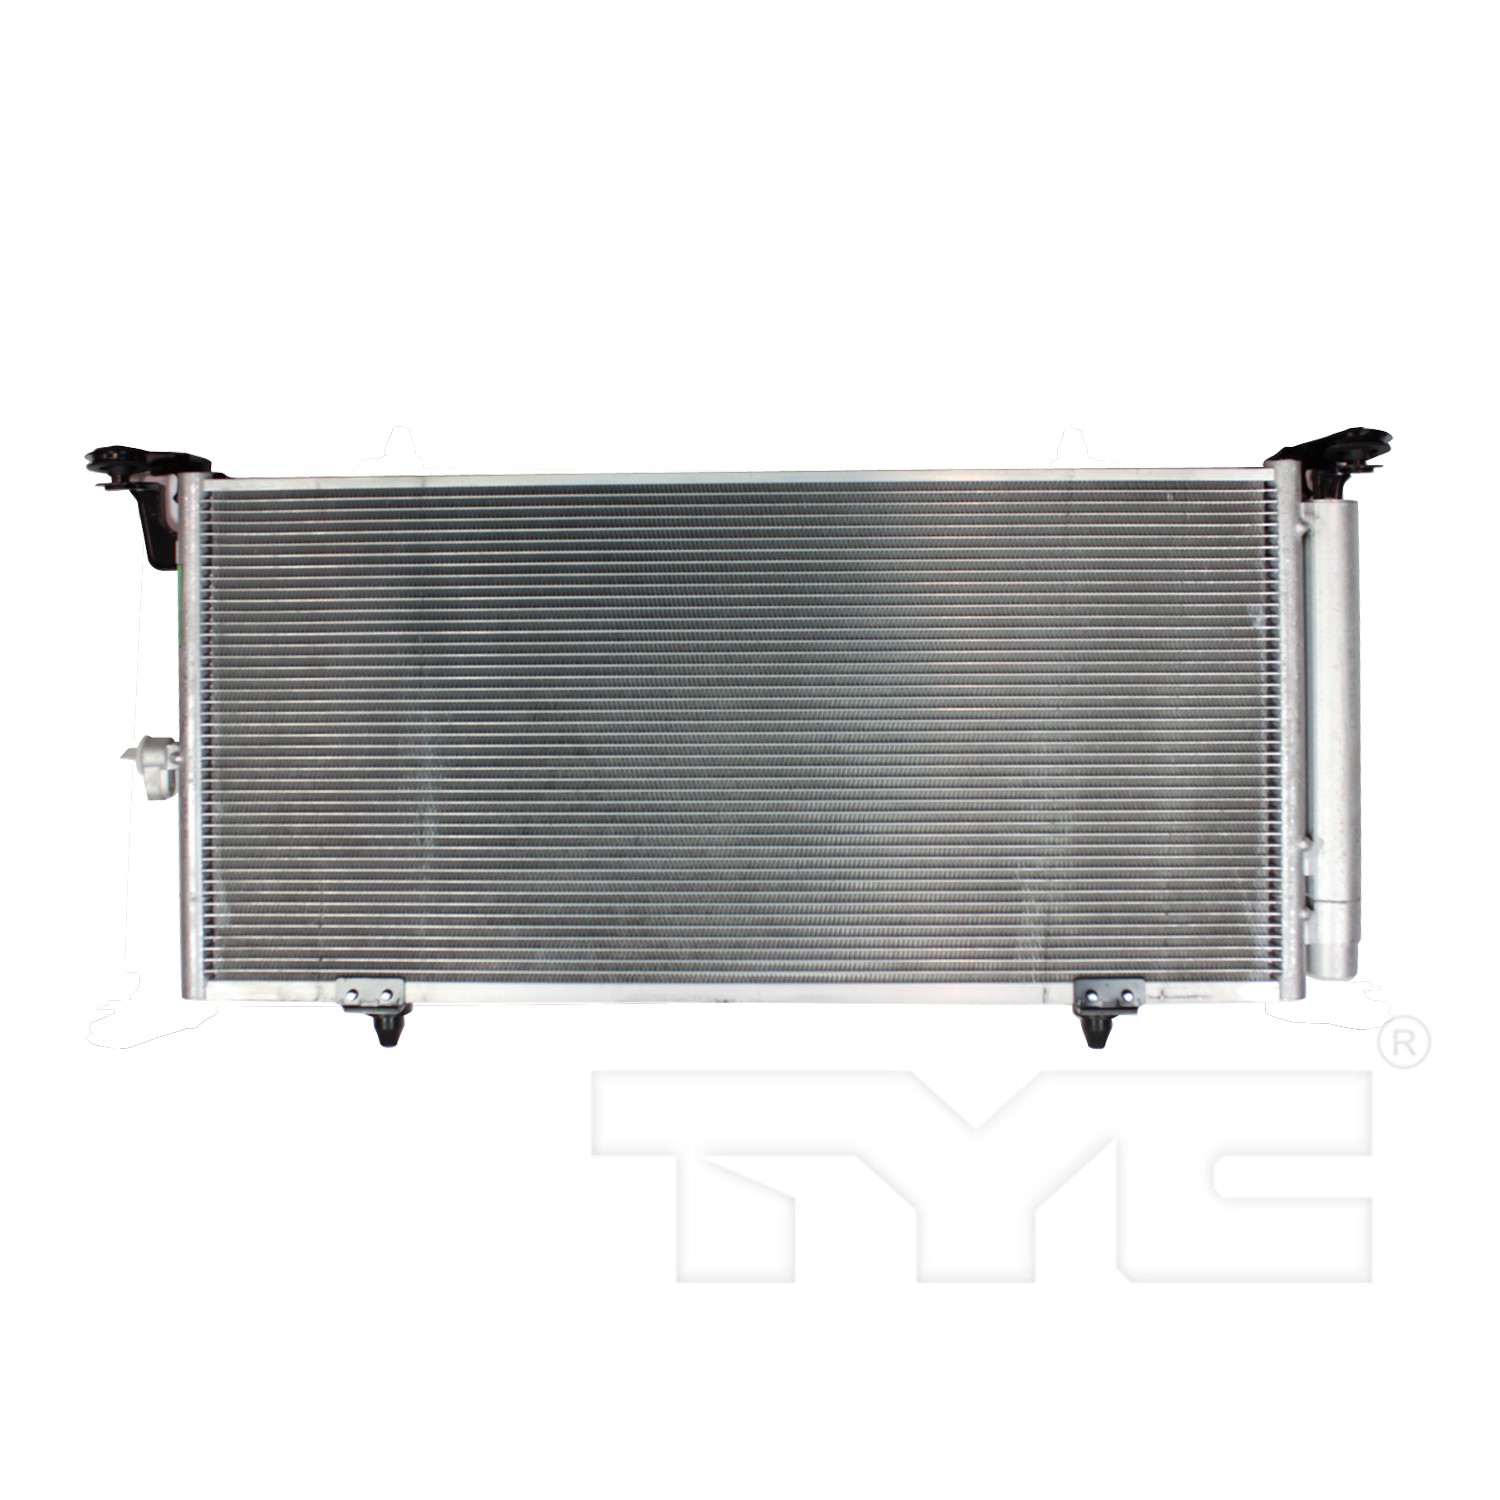 Aftermarket AC CONDENSERS for SUBARU - OUTBACK, OUTBACK,10-14,Air conditioning condenser